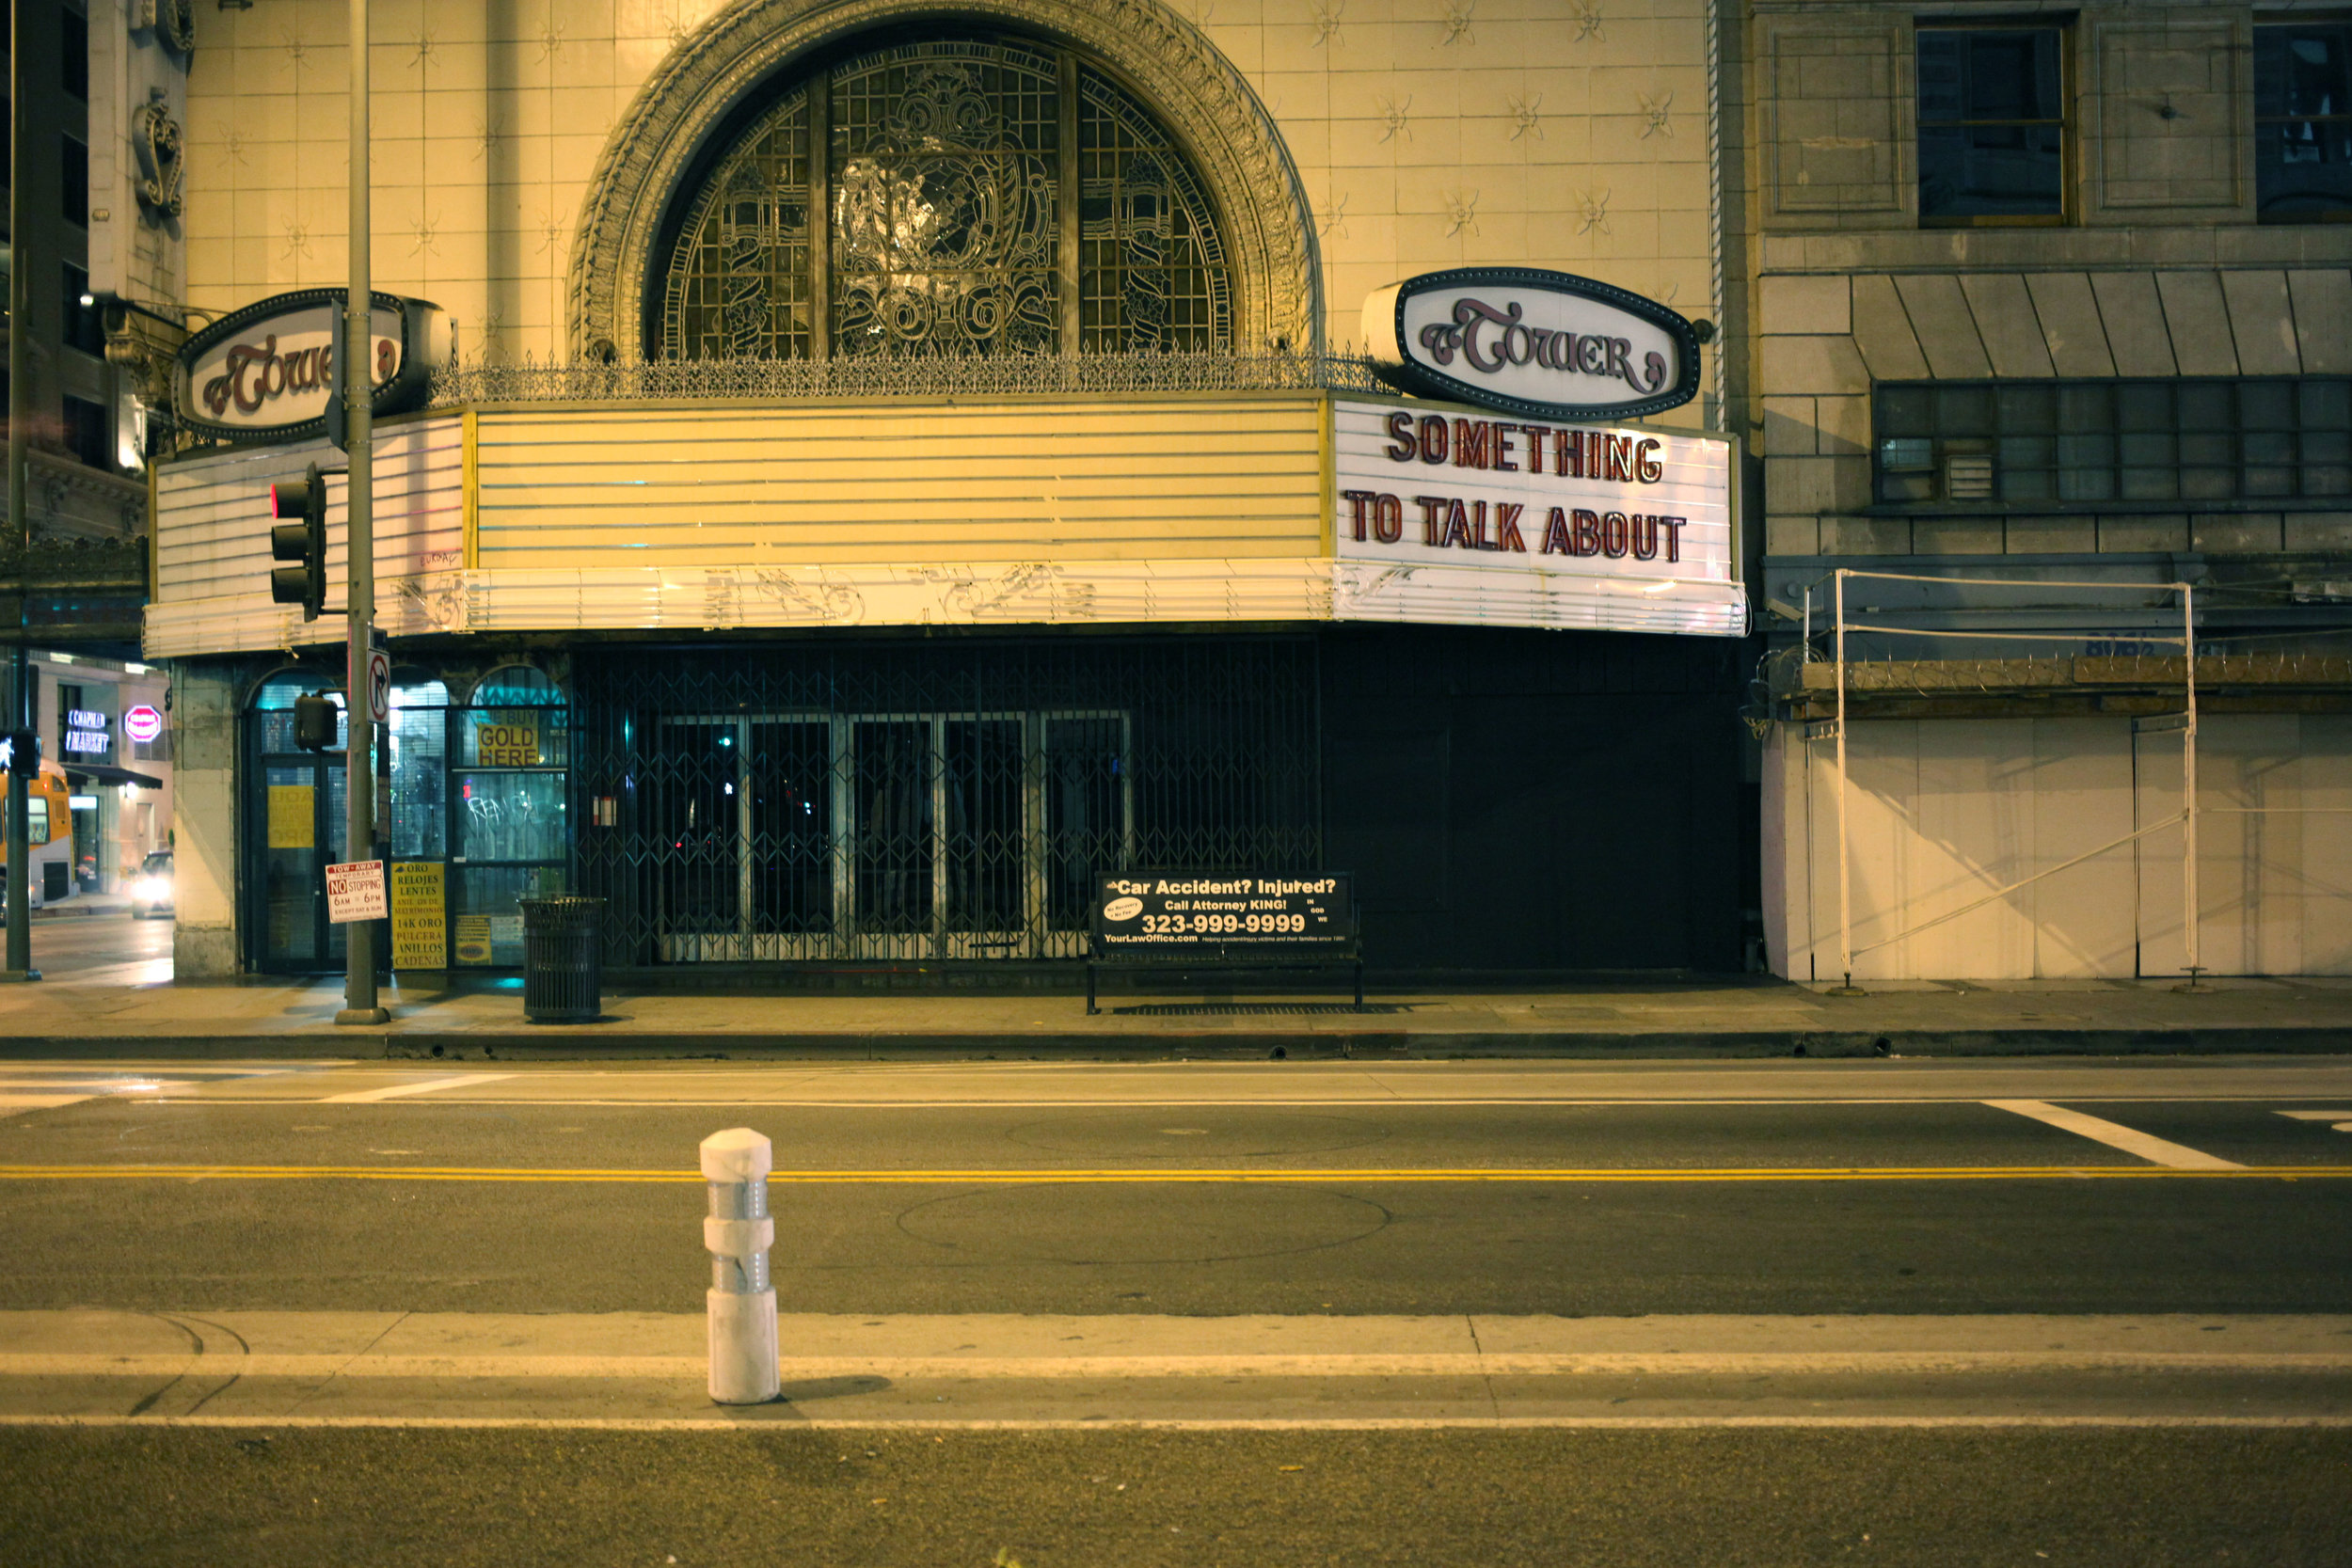  Tower Theatre (something to talk about), Los Angeles, 2015 